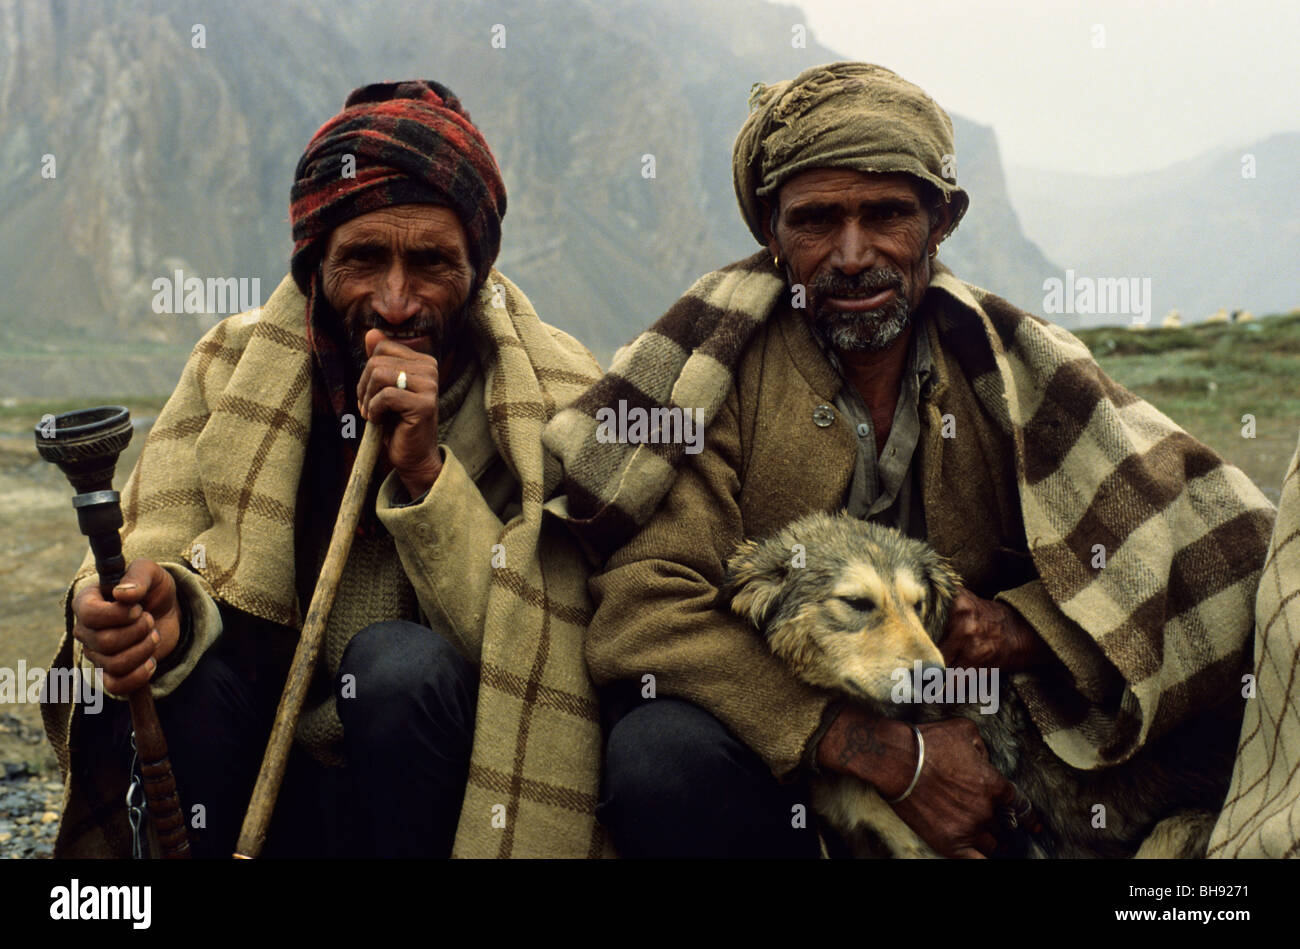 Two Sheperds from Lahoul, a northern province of India. Stock Photo